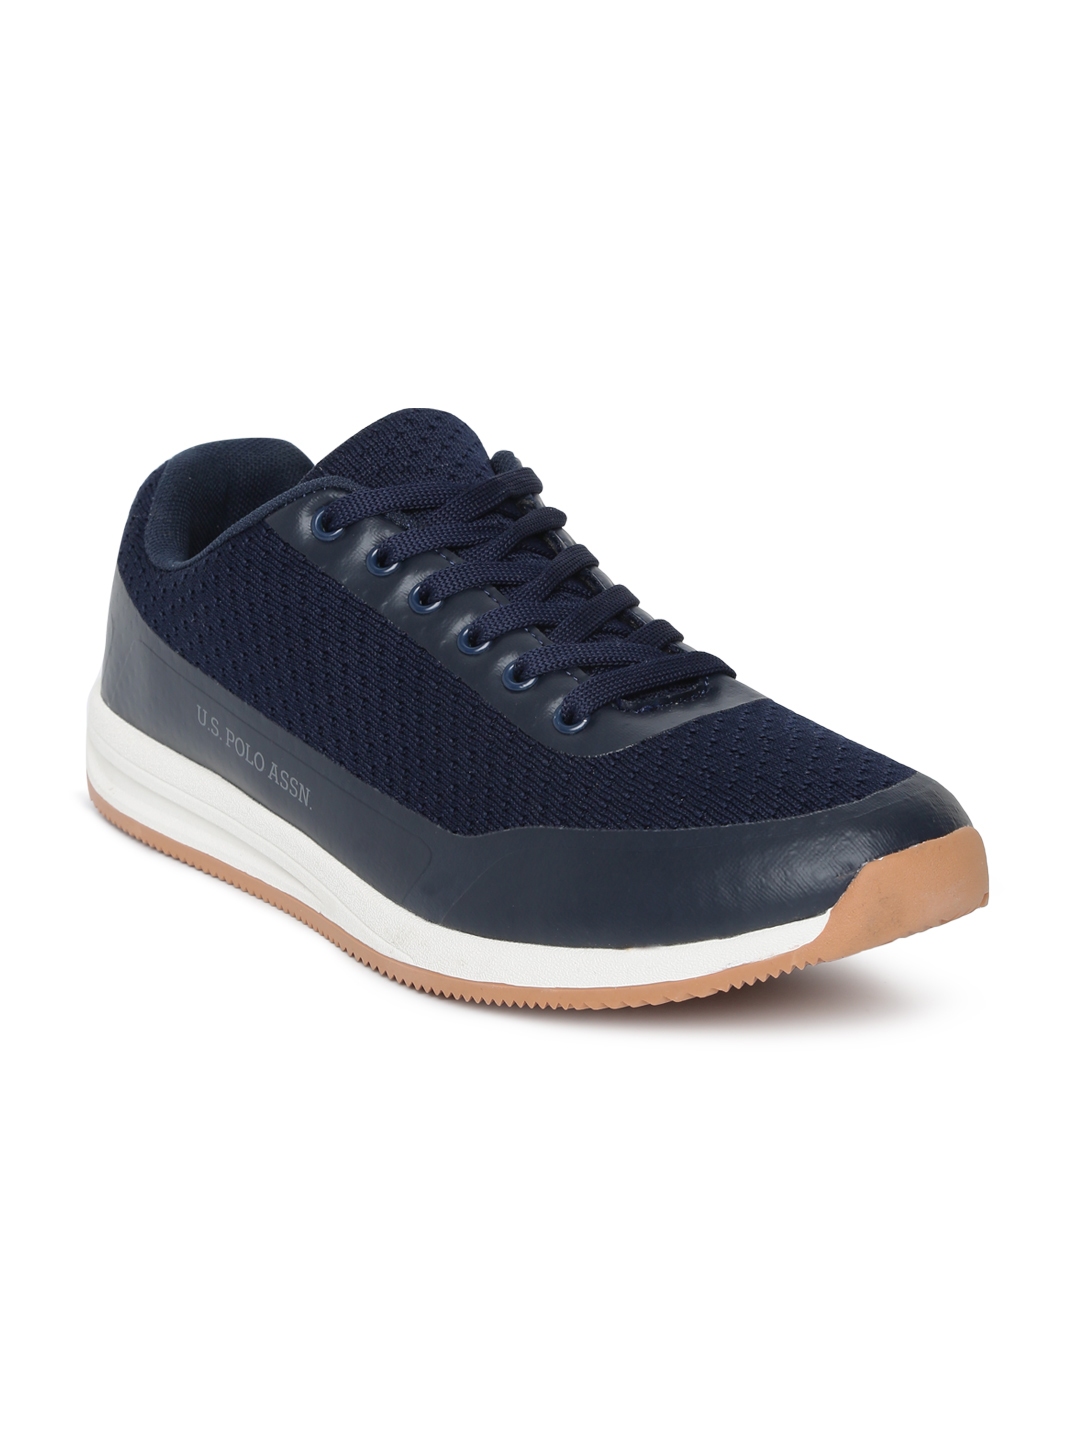 us polo blue sneakers